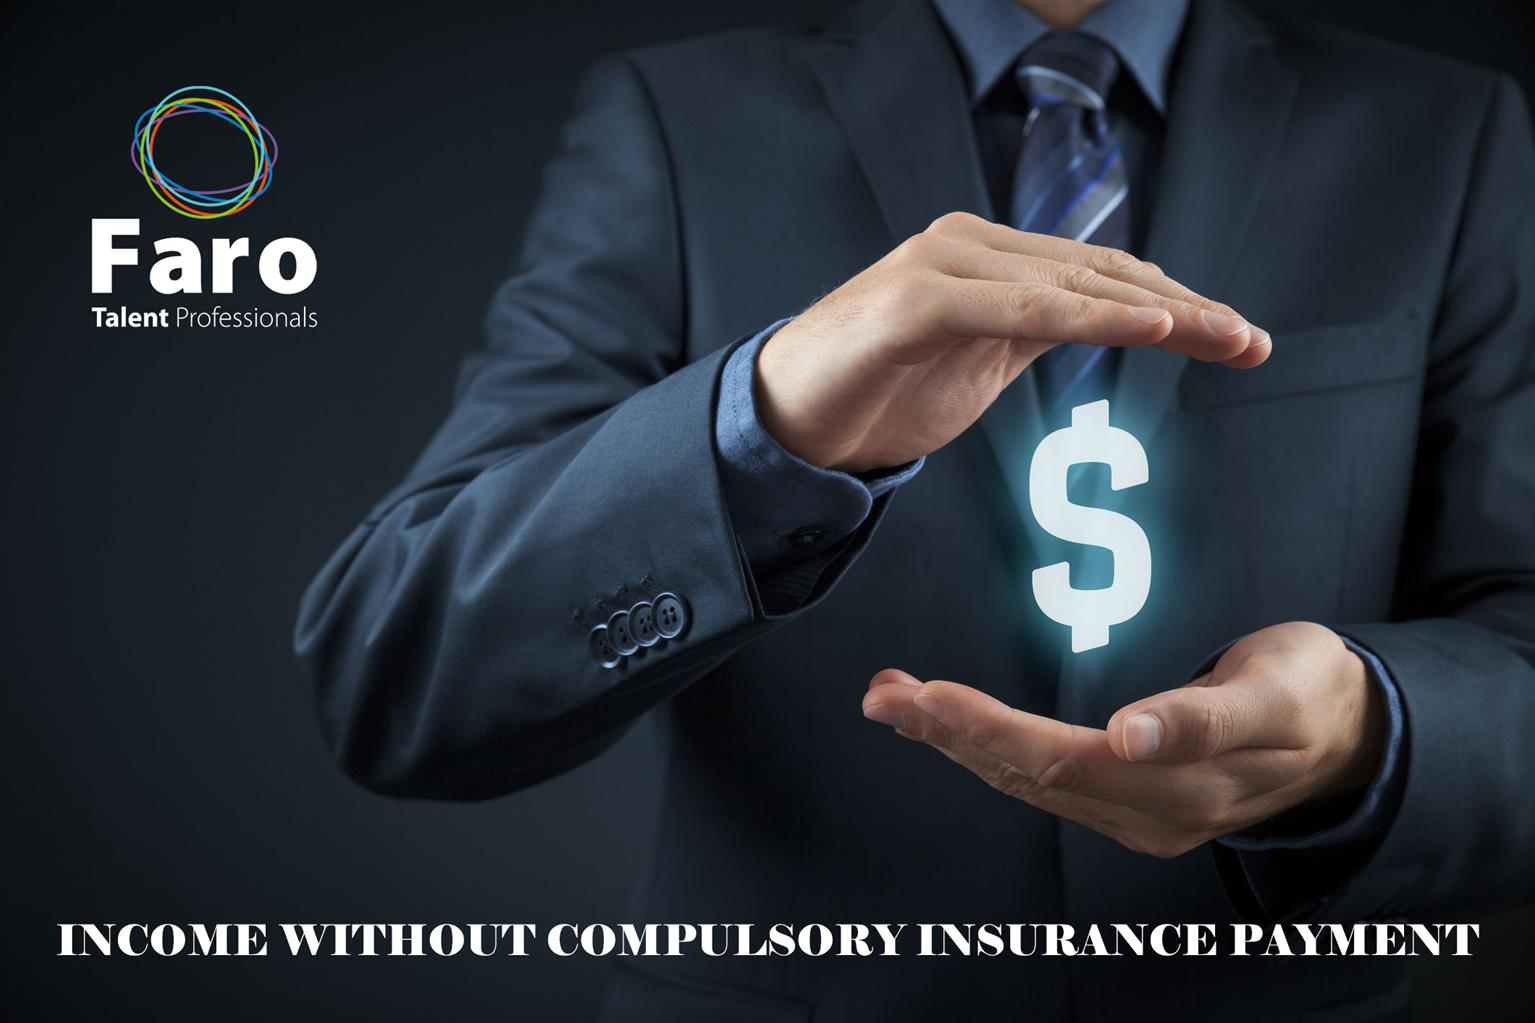 INCOME WITHOUT COMPULSORY INSURANCE PAYMENT